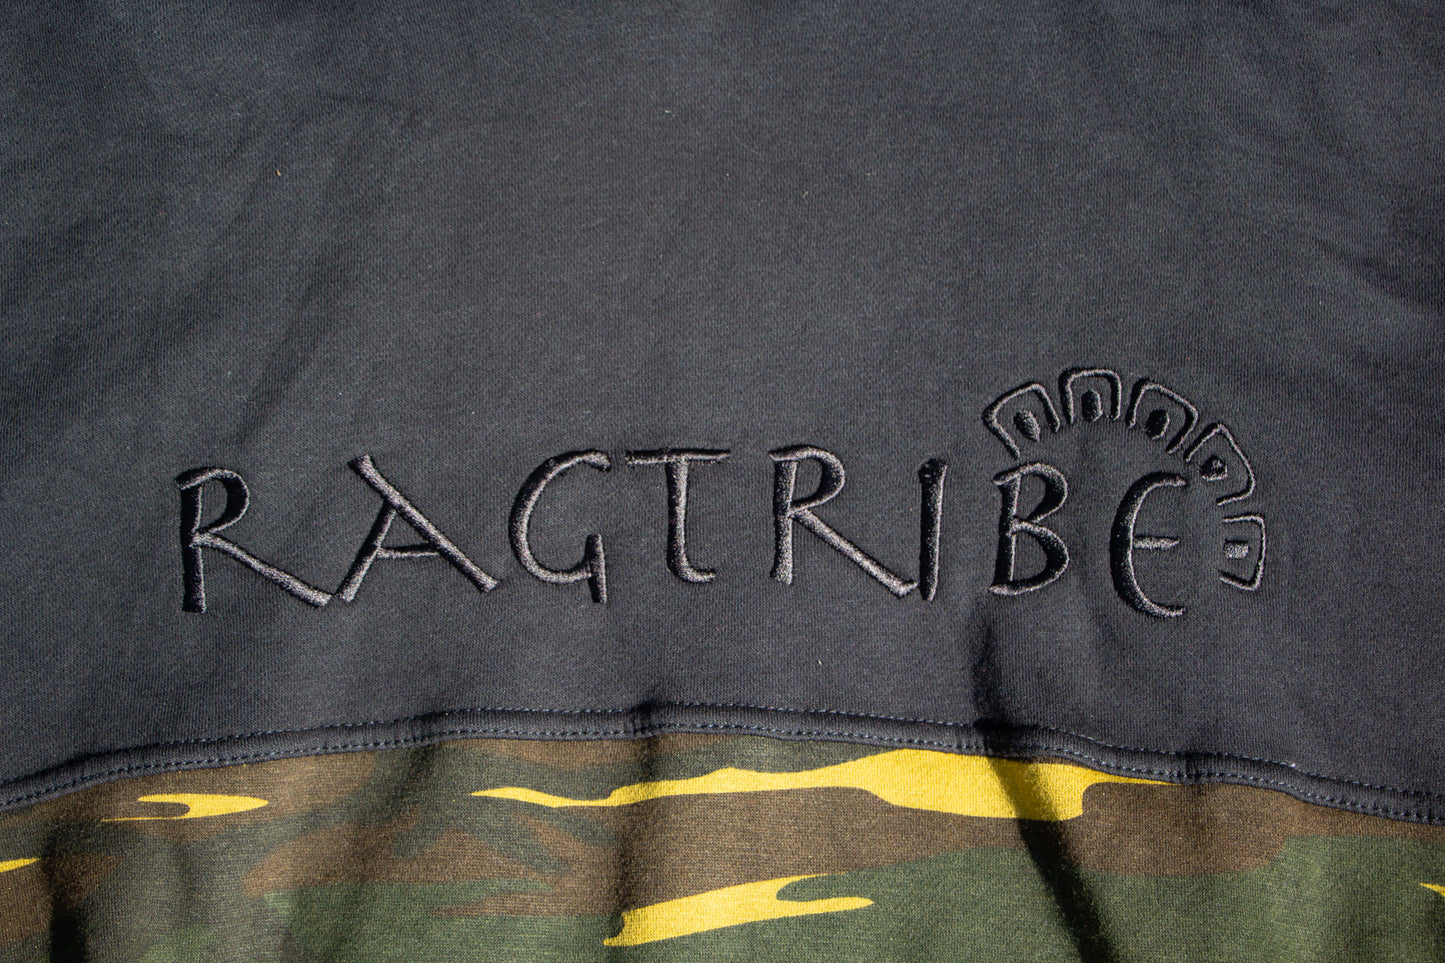 The Liberation Hoodie - Ragtribe Ethical Clothing & Productions, LLC